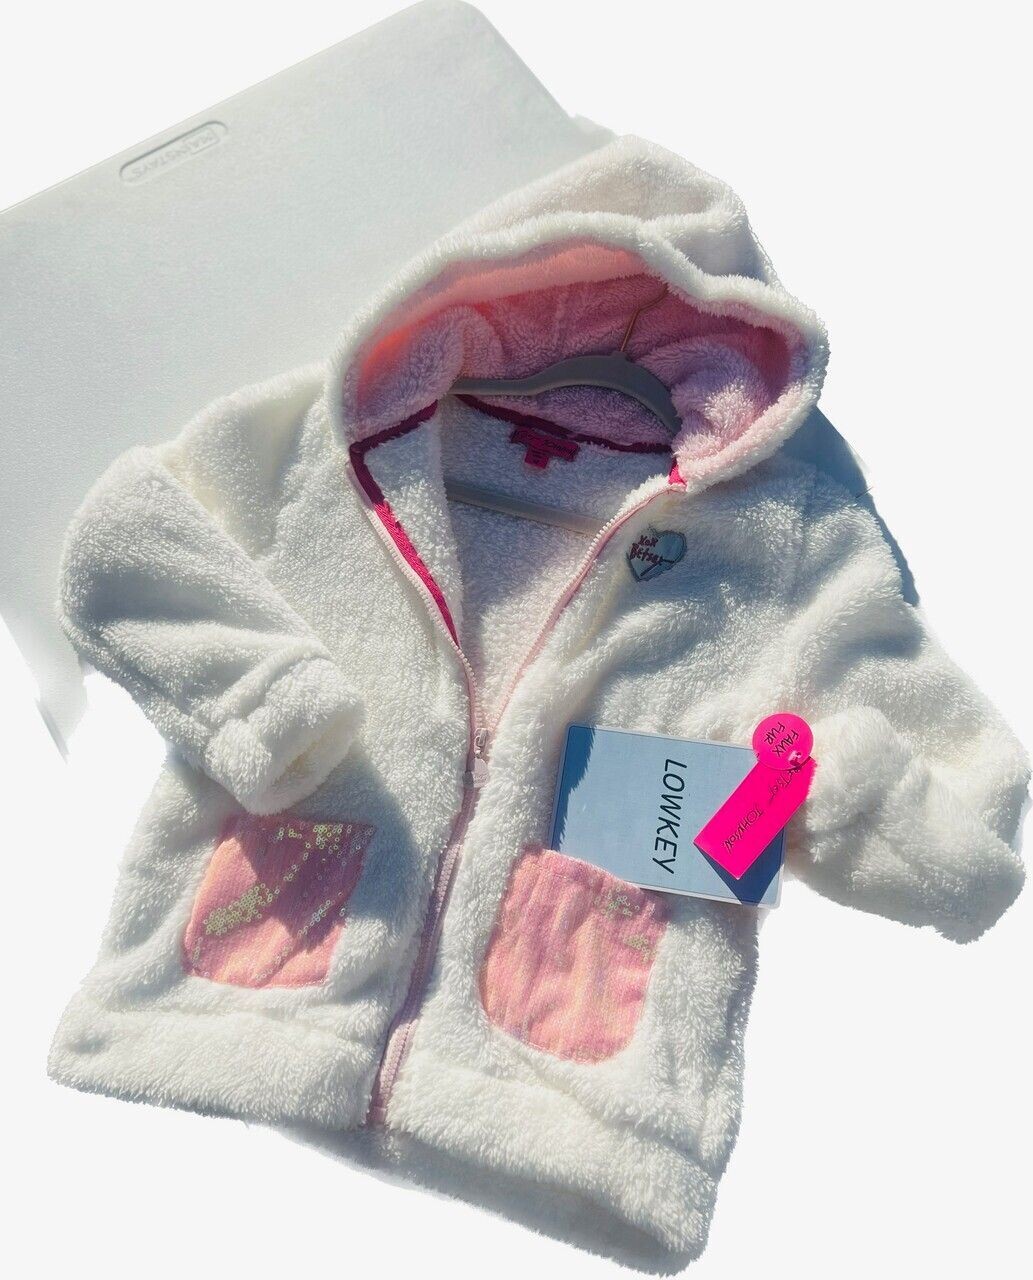 ​Betsey Johnson Faux Fur Full Zippered Hoodie Jacket with 2 pink sequin pockets